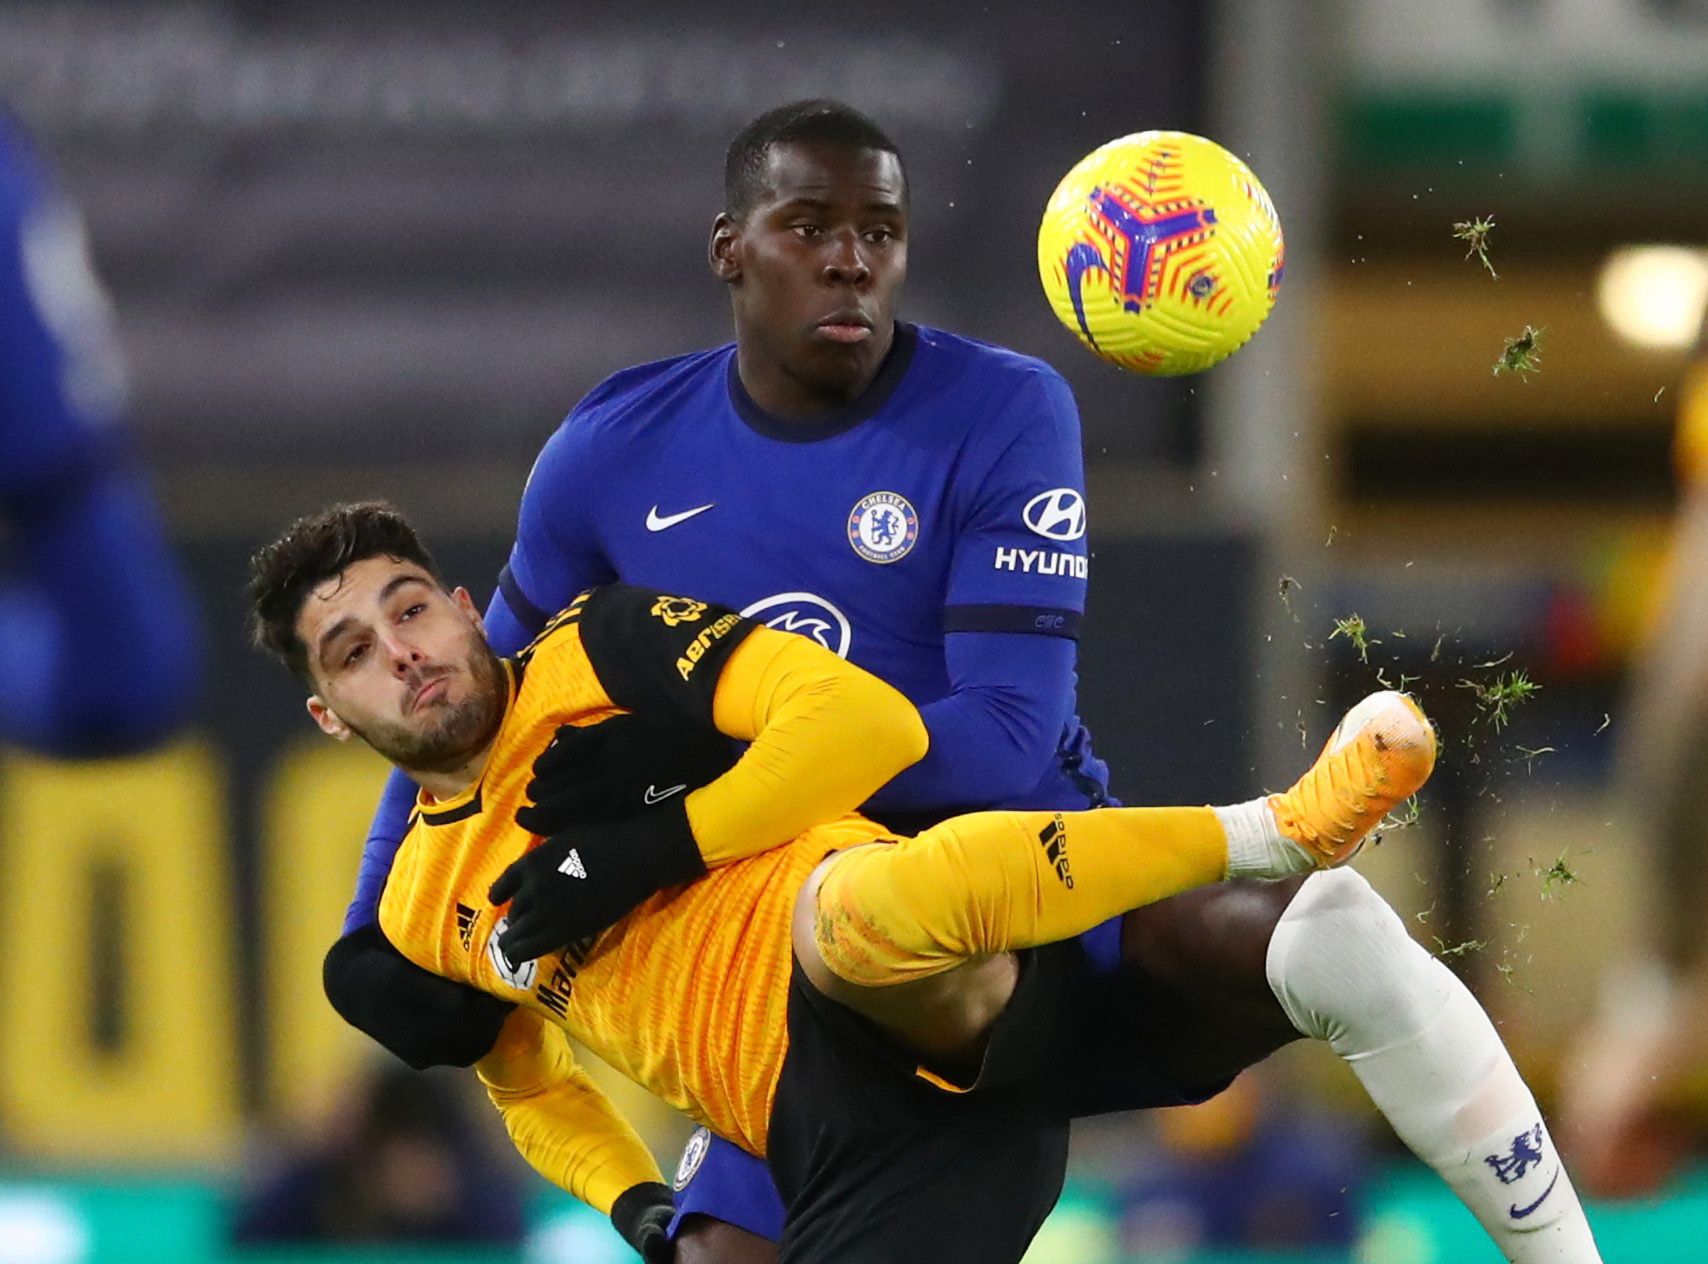 Soccer Football - Premier League - Wolverhampton Wanderers v Chelsea - Molineux Stadium, Wolverhampton, Britain - December 15, 2020 Wolverhampton Wanderers' Pedro Neto in action with Chelsea's Kurt Zouma Pool via REUTERS/Michael Steele EDITORIAL USE ONLY. No use with unauthorized audio, video, data, fixture lists, club/league logos or 'live' services. Online in-match use limited to 75 images, no video emulation. No use in betting, games or single club /league/player publications.  Please contact